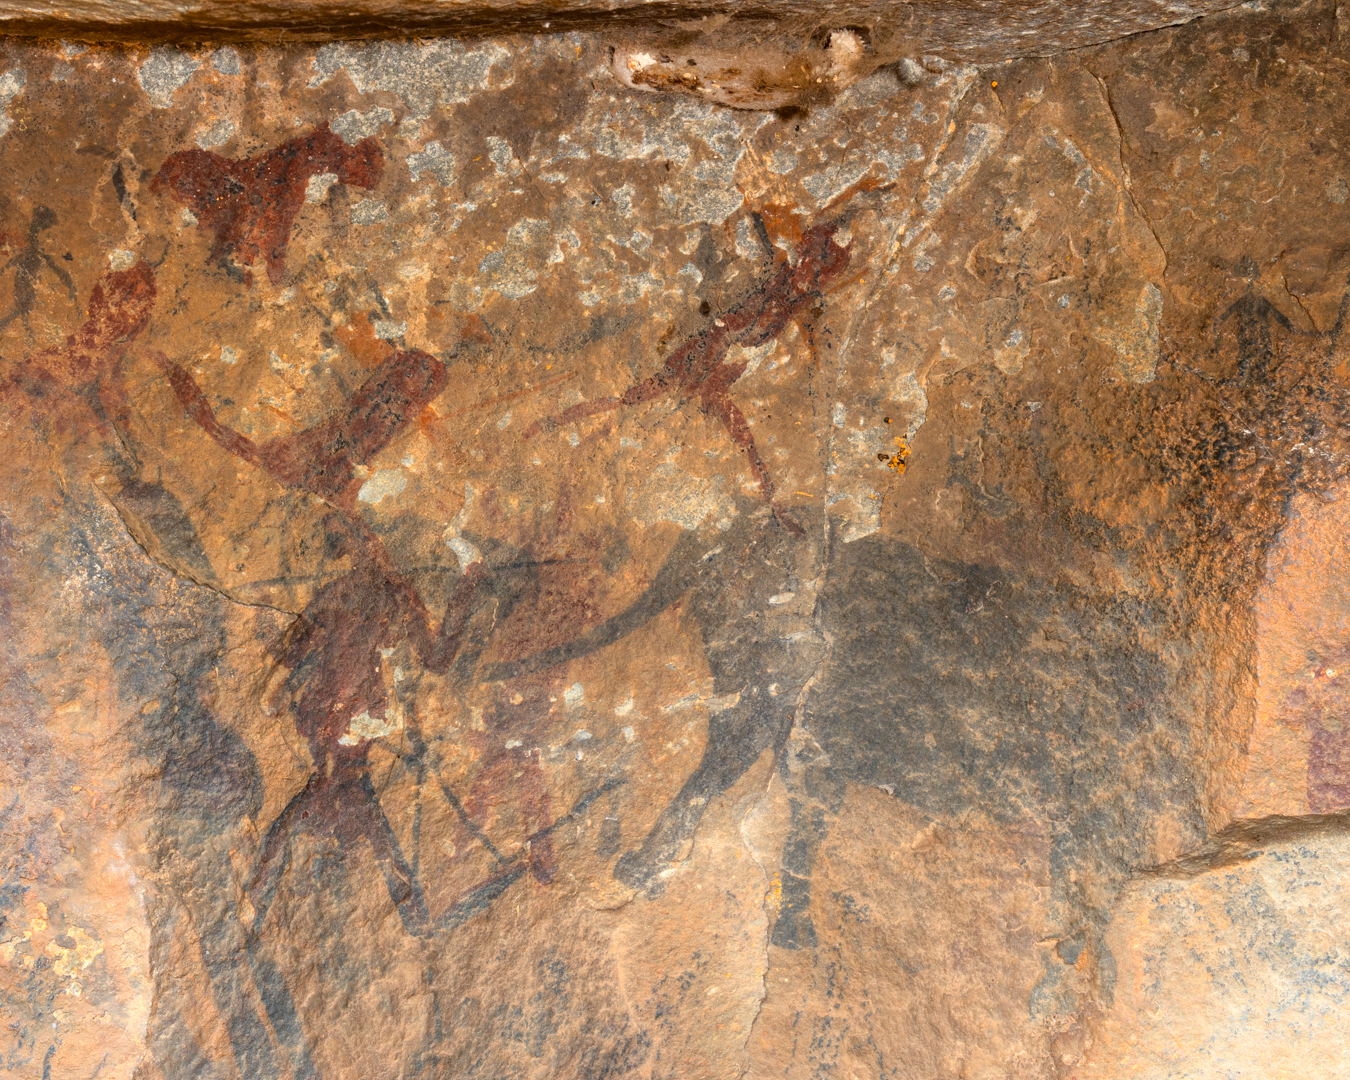 Rock paintings of several running figures and a black elephant